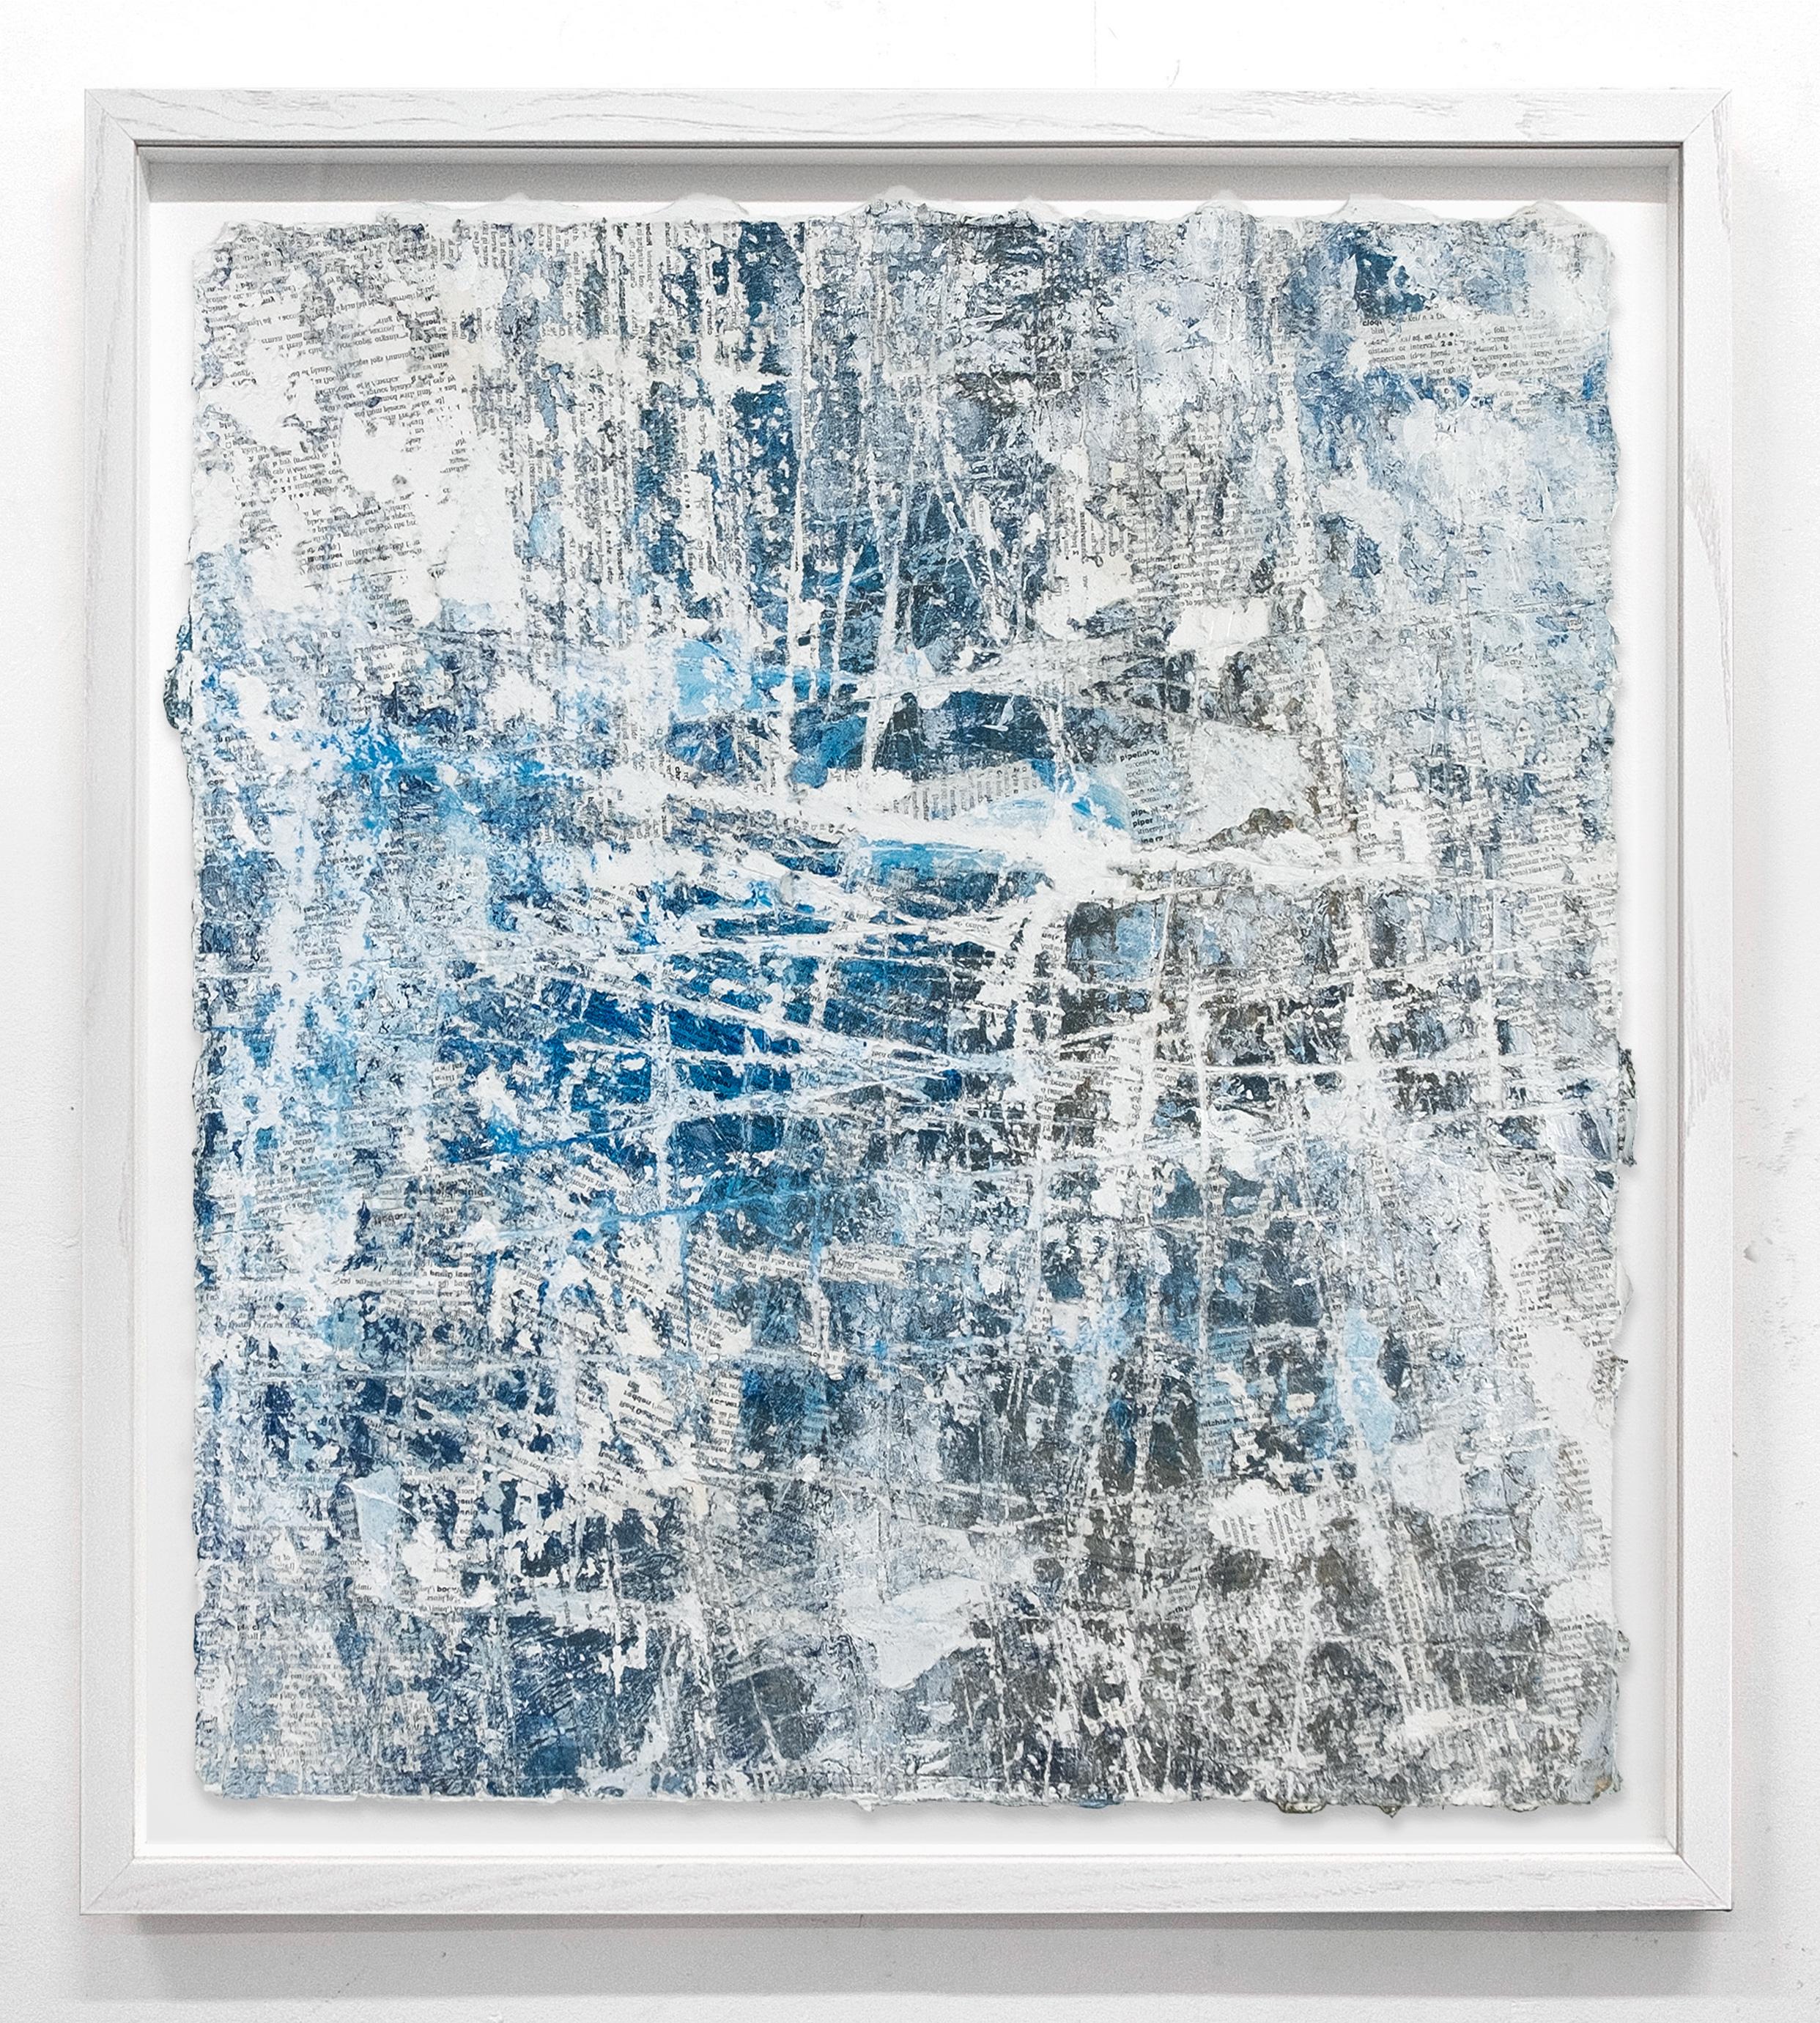 David Fredrik Moussallem Abstract Drawing - Breathing - textural blue and white abstract painting on paper framed